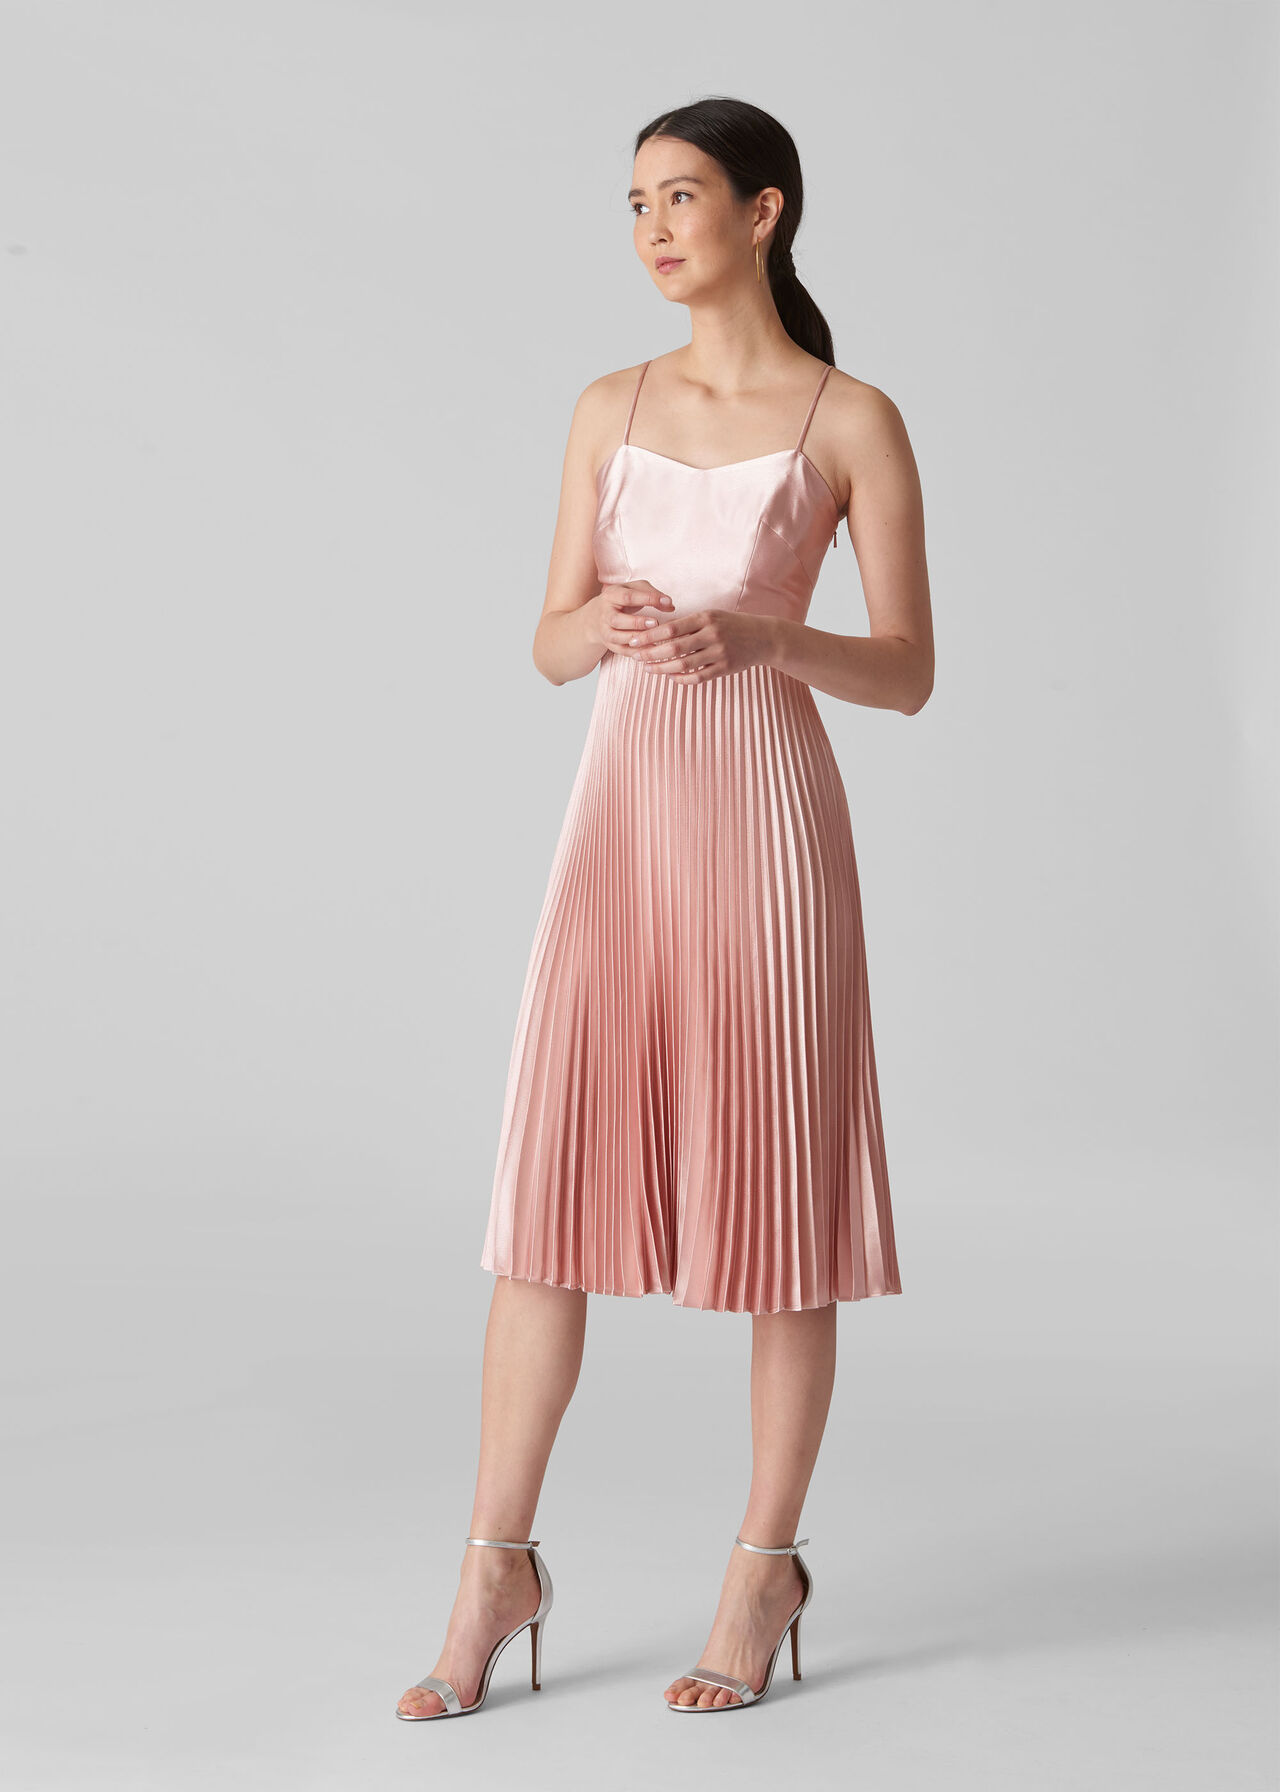 Pale Pink Satin Pleated Strappy Dress | WHISTLES